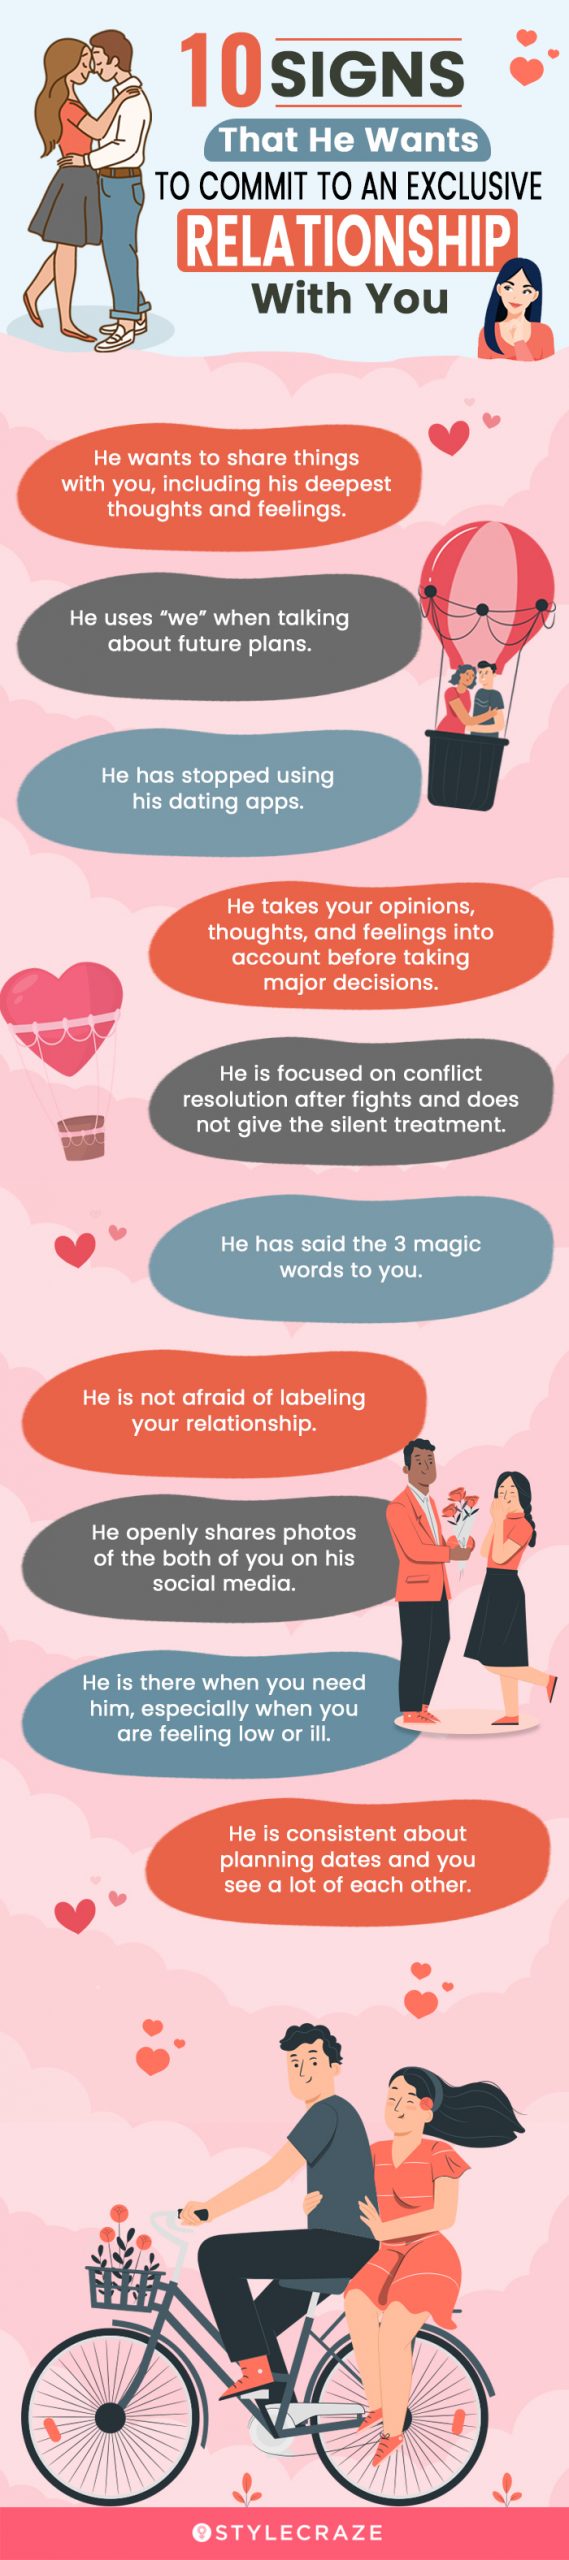 10 signs that he wants to commit to an exclusive relationship with you (infographic)